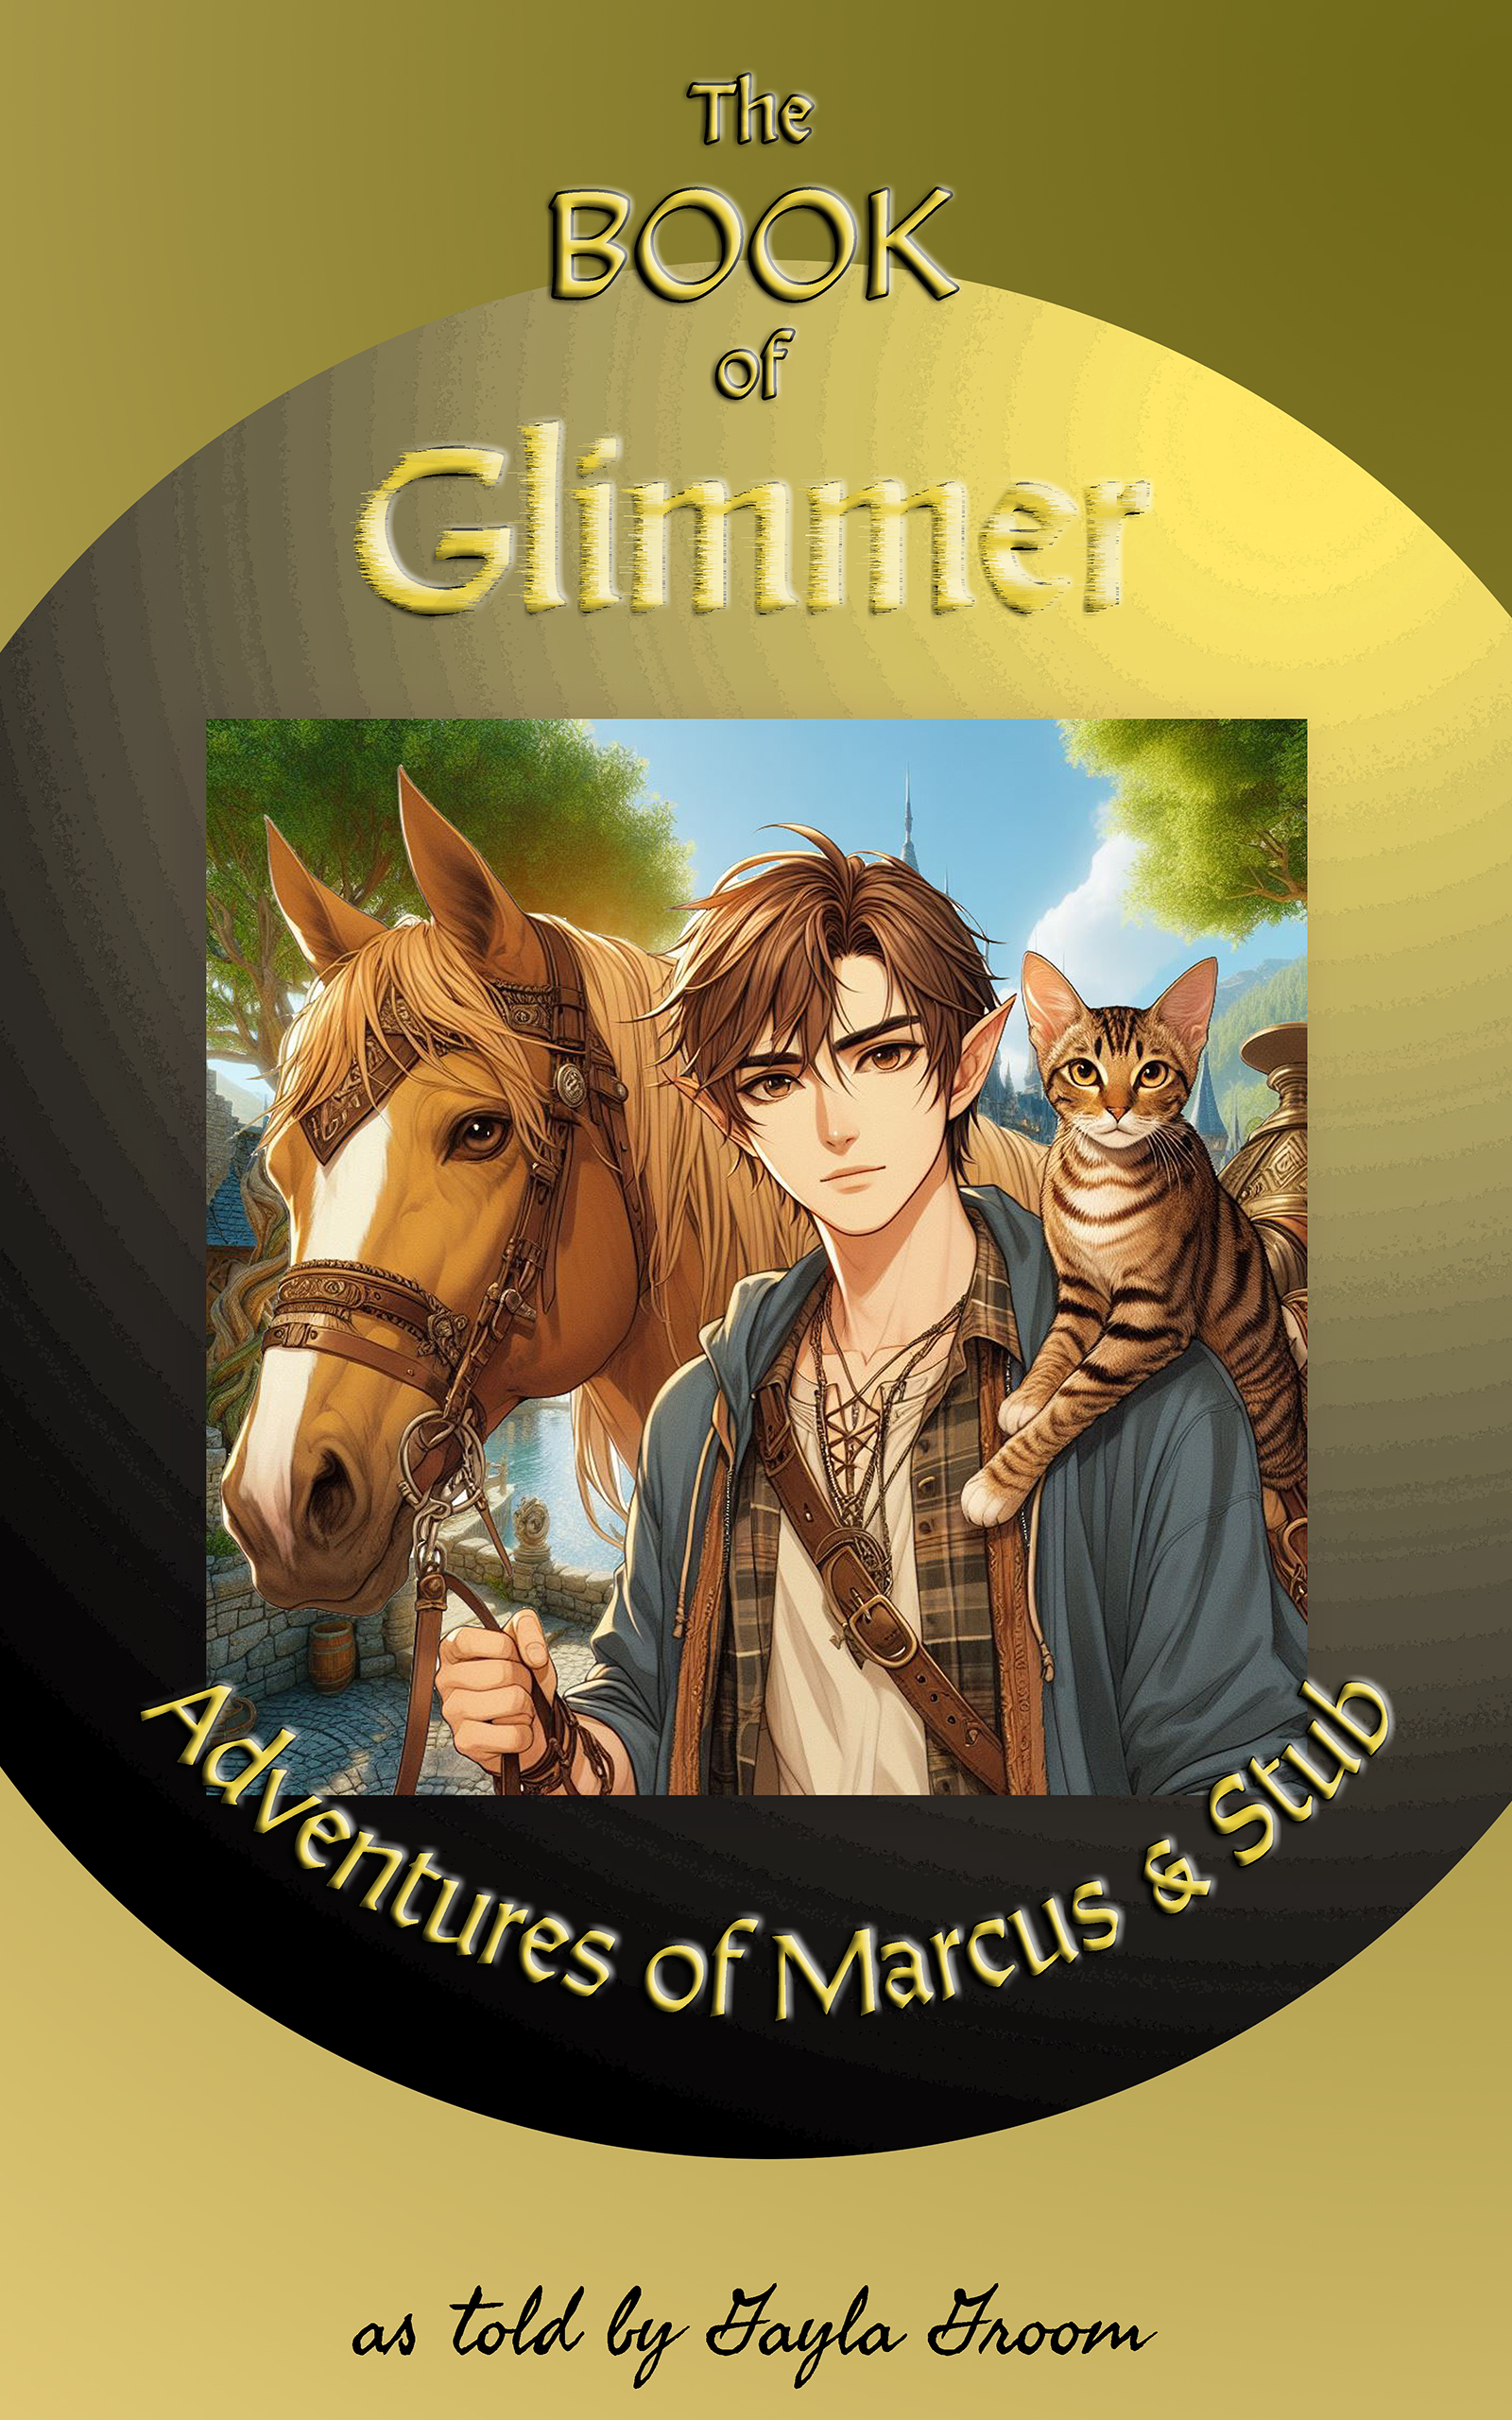 The Book of Glimmer: Adventures of Marcus & Stub